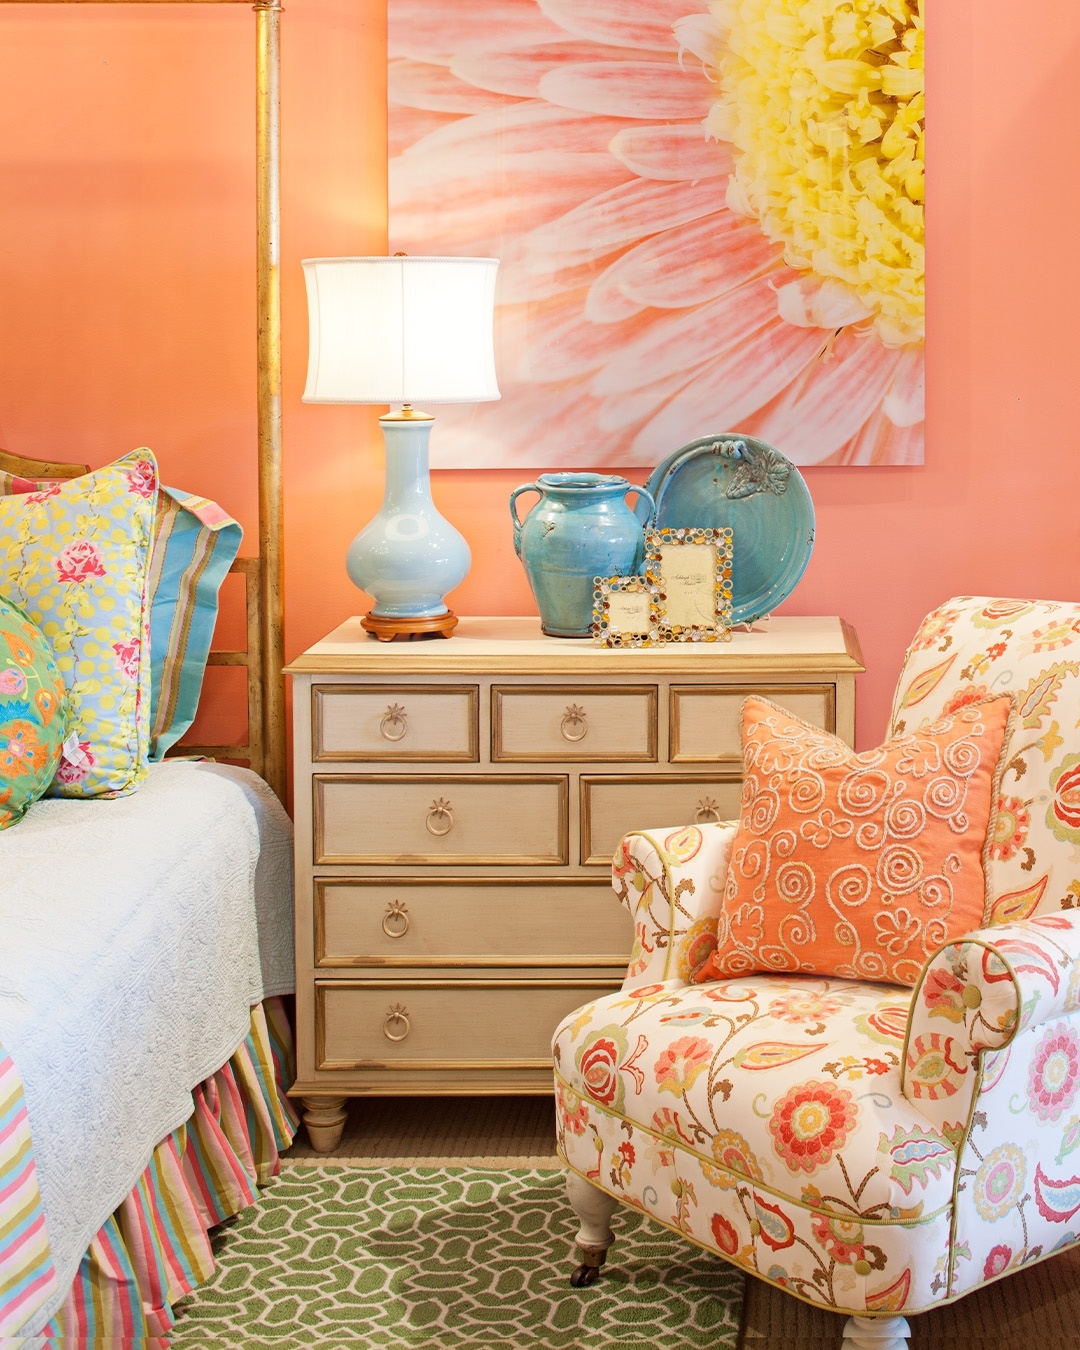 A Guide to Decorating Your Home with Bold Colors